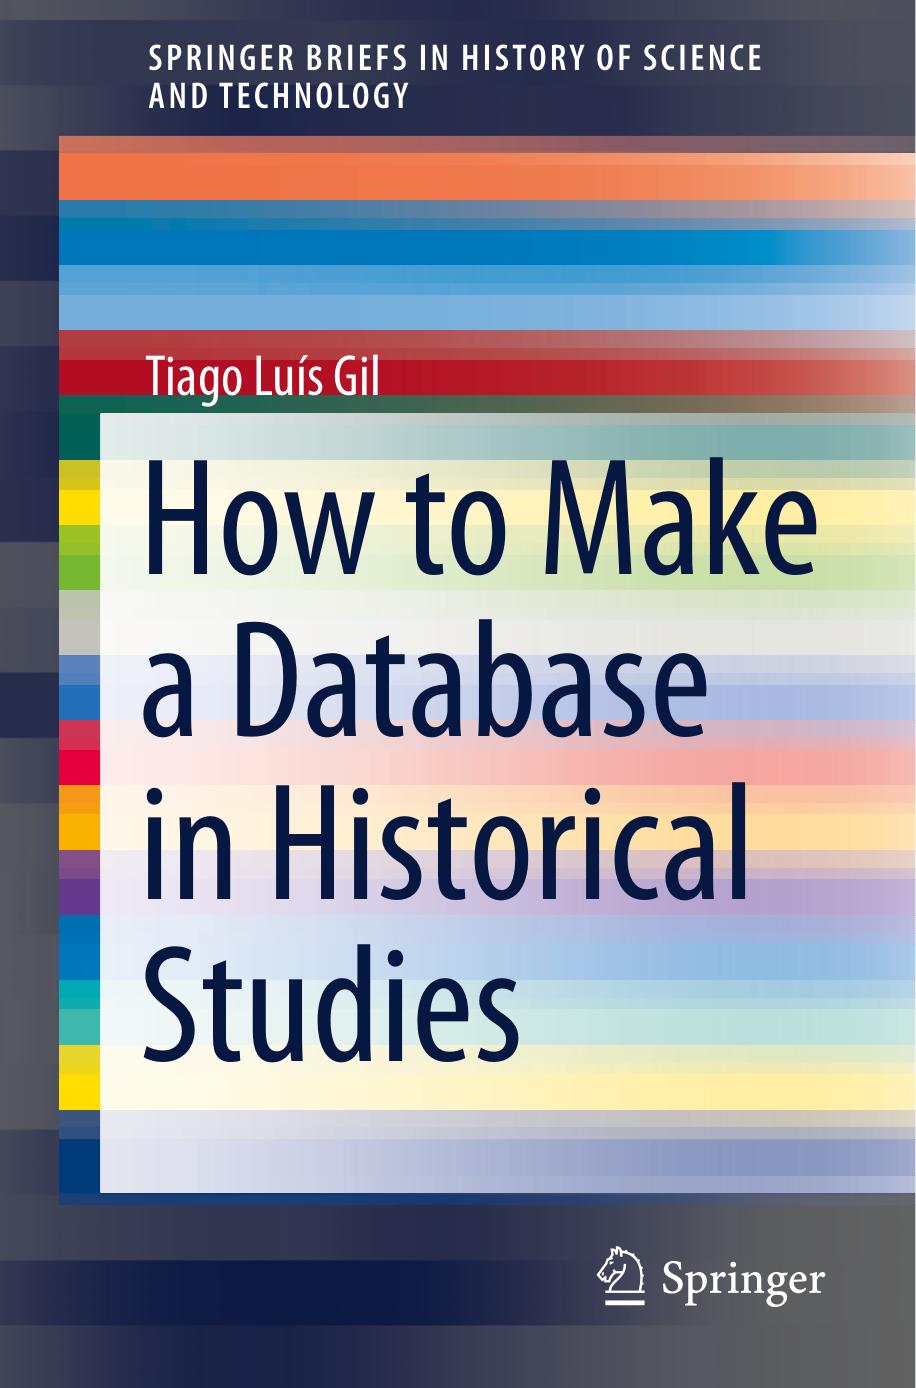 How to Make a Database in Historical Studies by Tiago Luís Gil